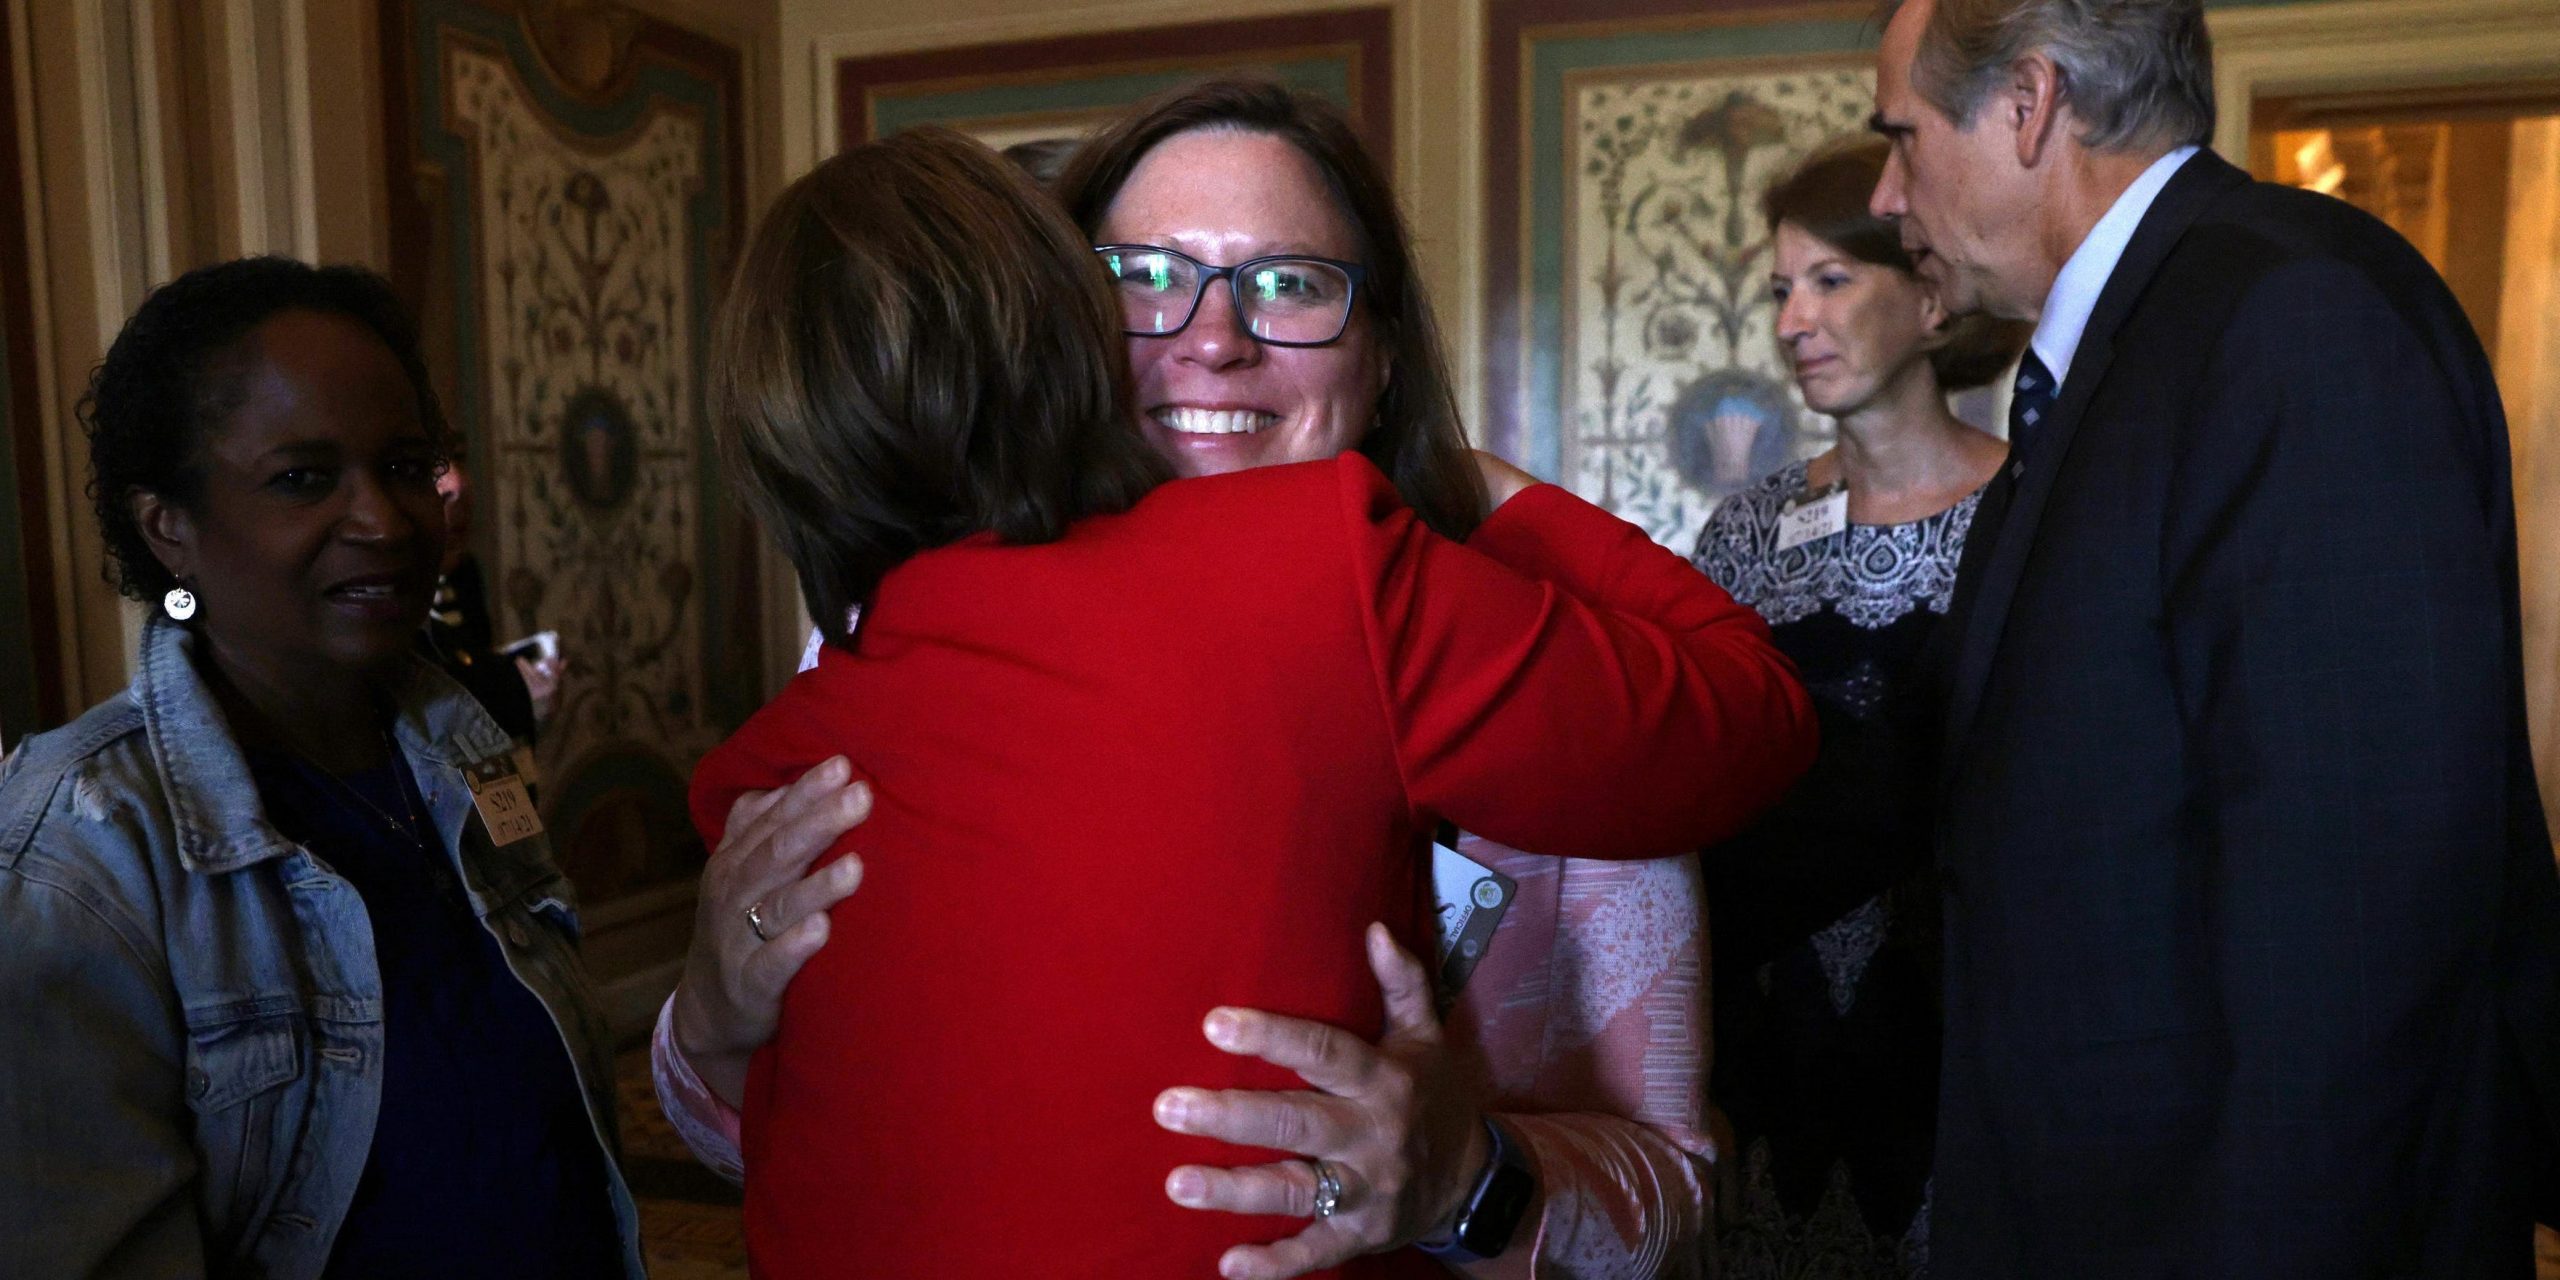 Texas State Rep. Julie Johnson, one of the two legislators currently in Portugal, hugs US Sen. Amy Klobuchar (D-MN) after a meeting between the senator and members of Texas House Democratic Caucus at the US Capitol July 14, 2021 in Washington, DC.